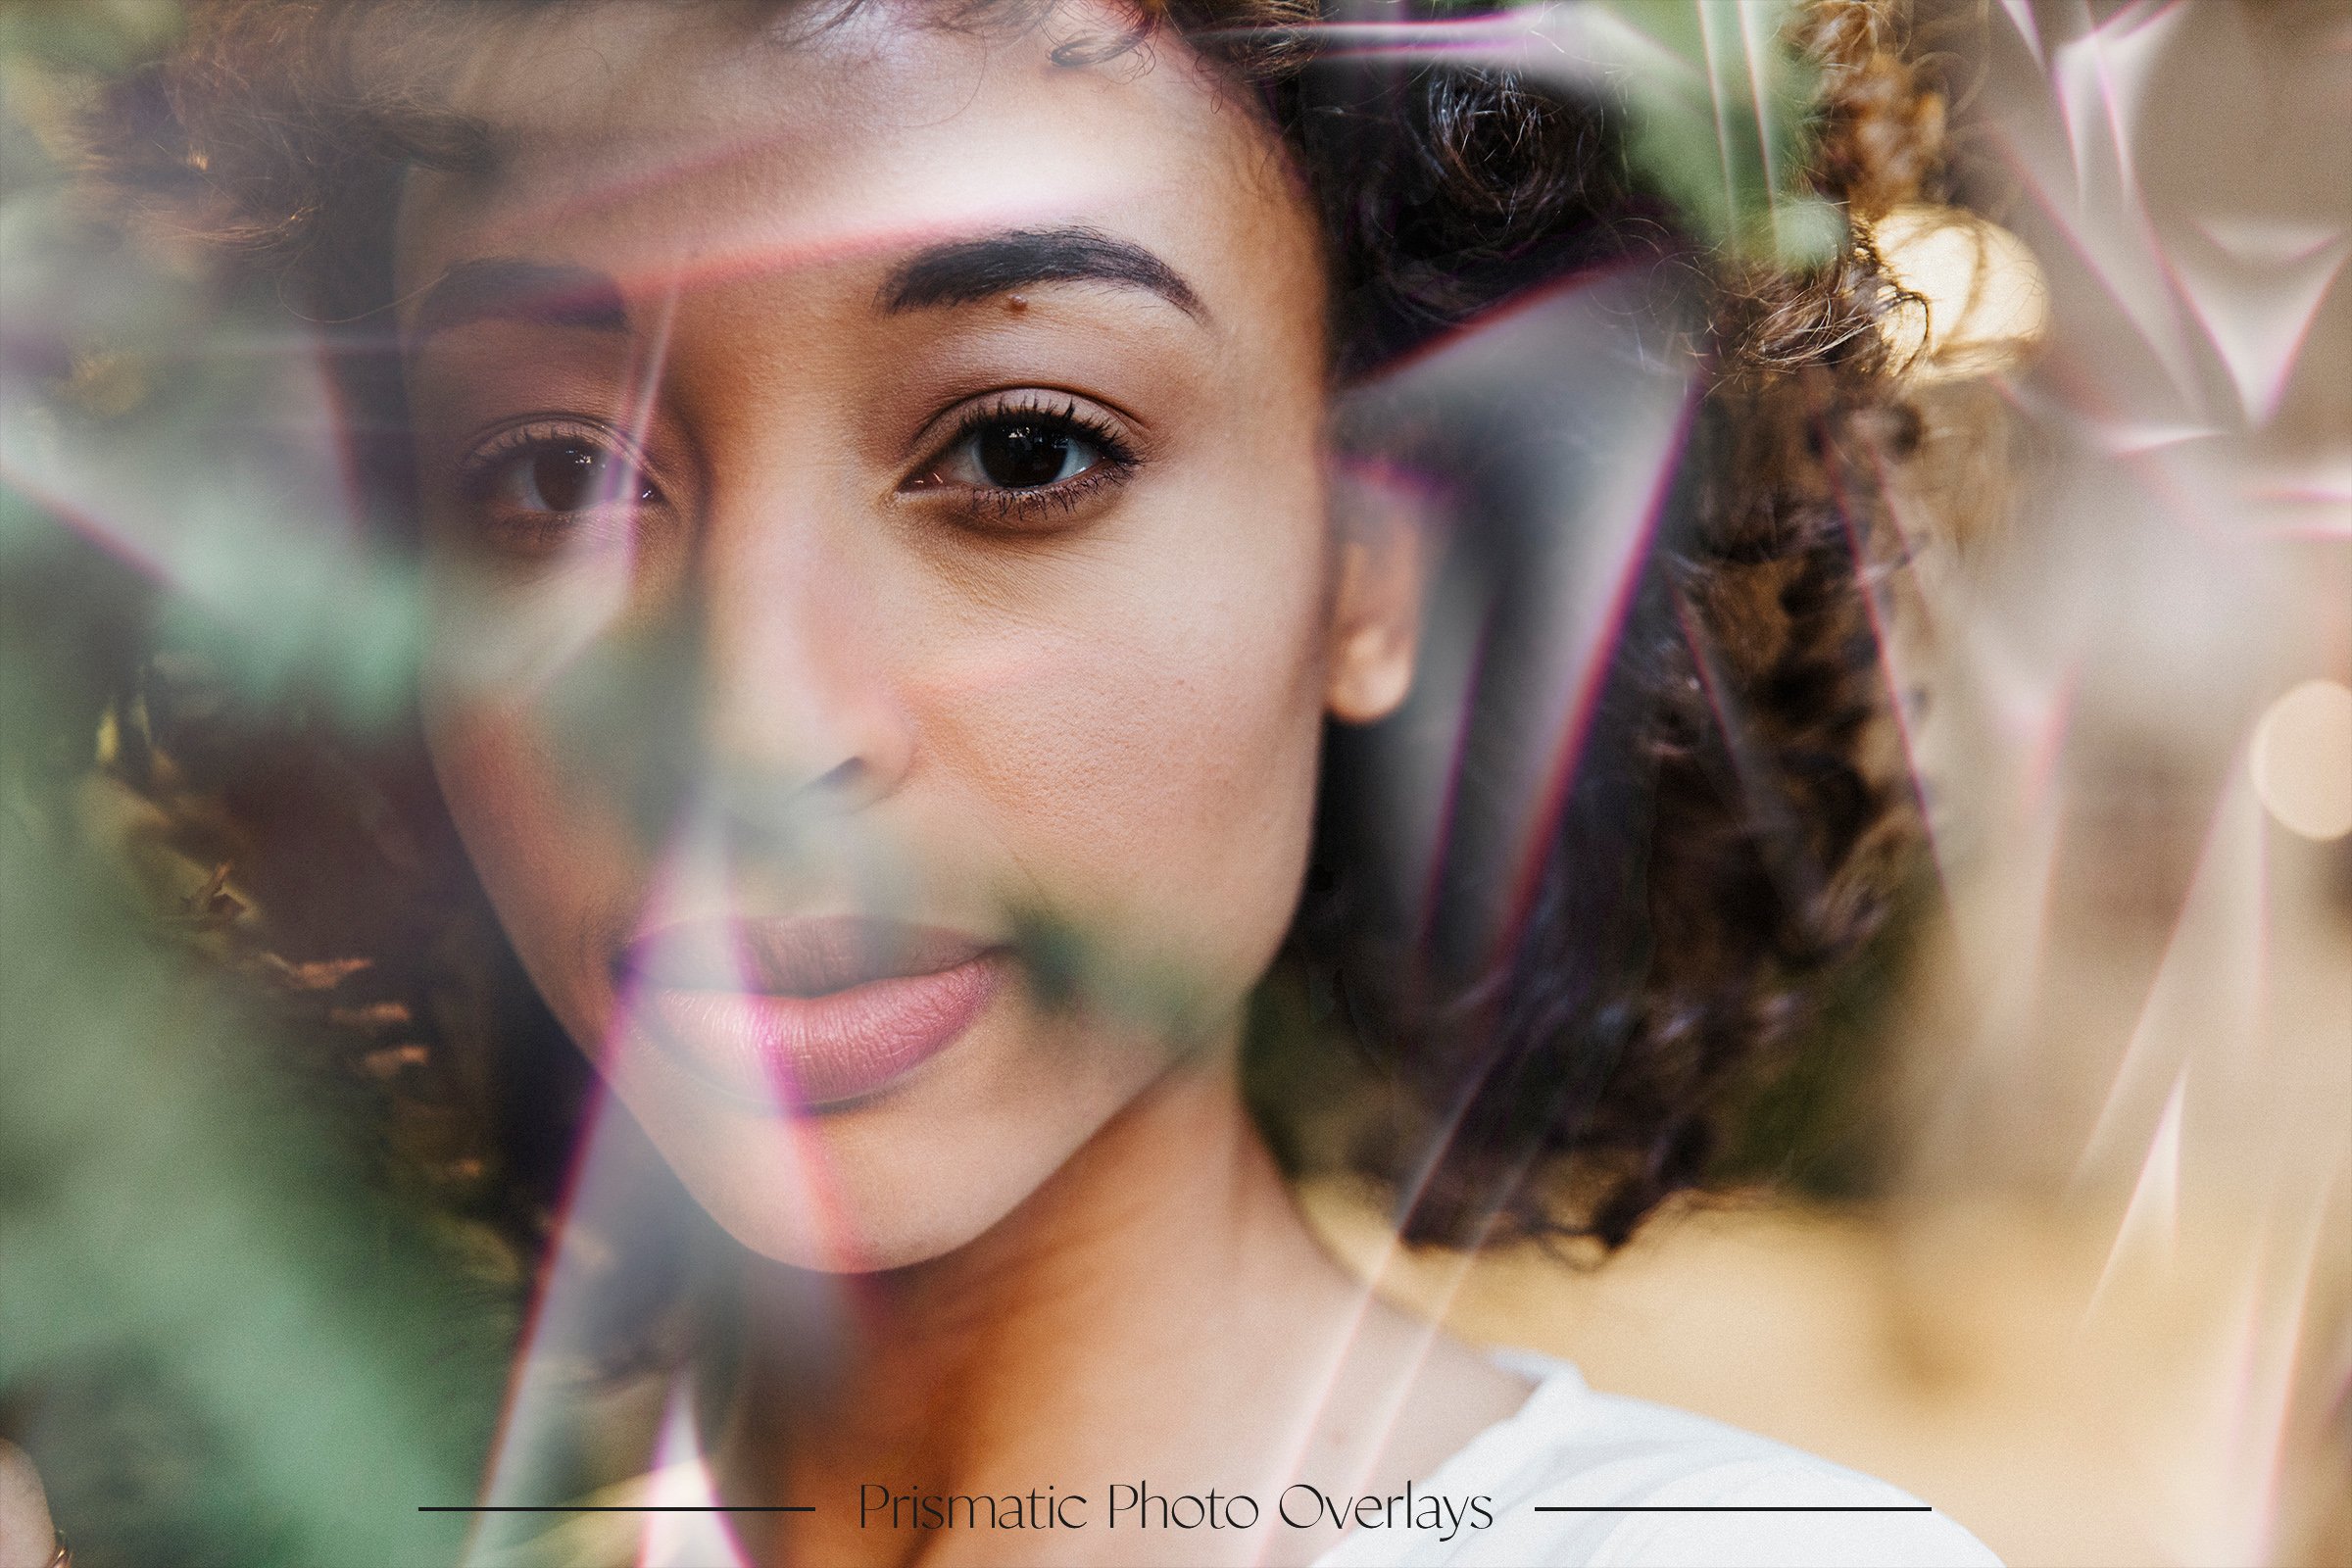 Beautiful girl with prismatic overlay.